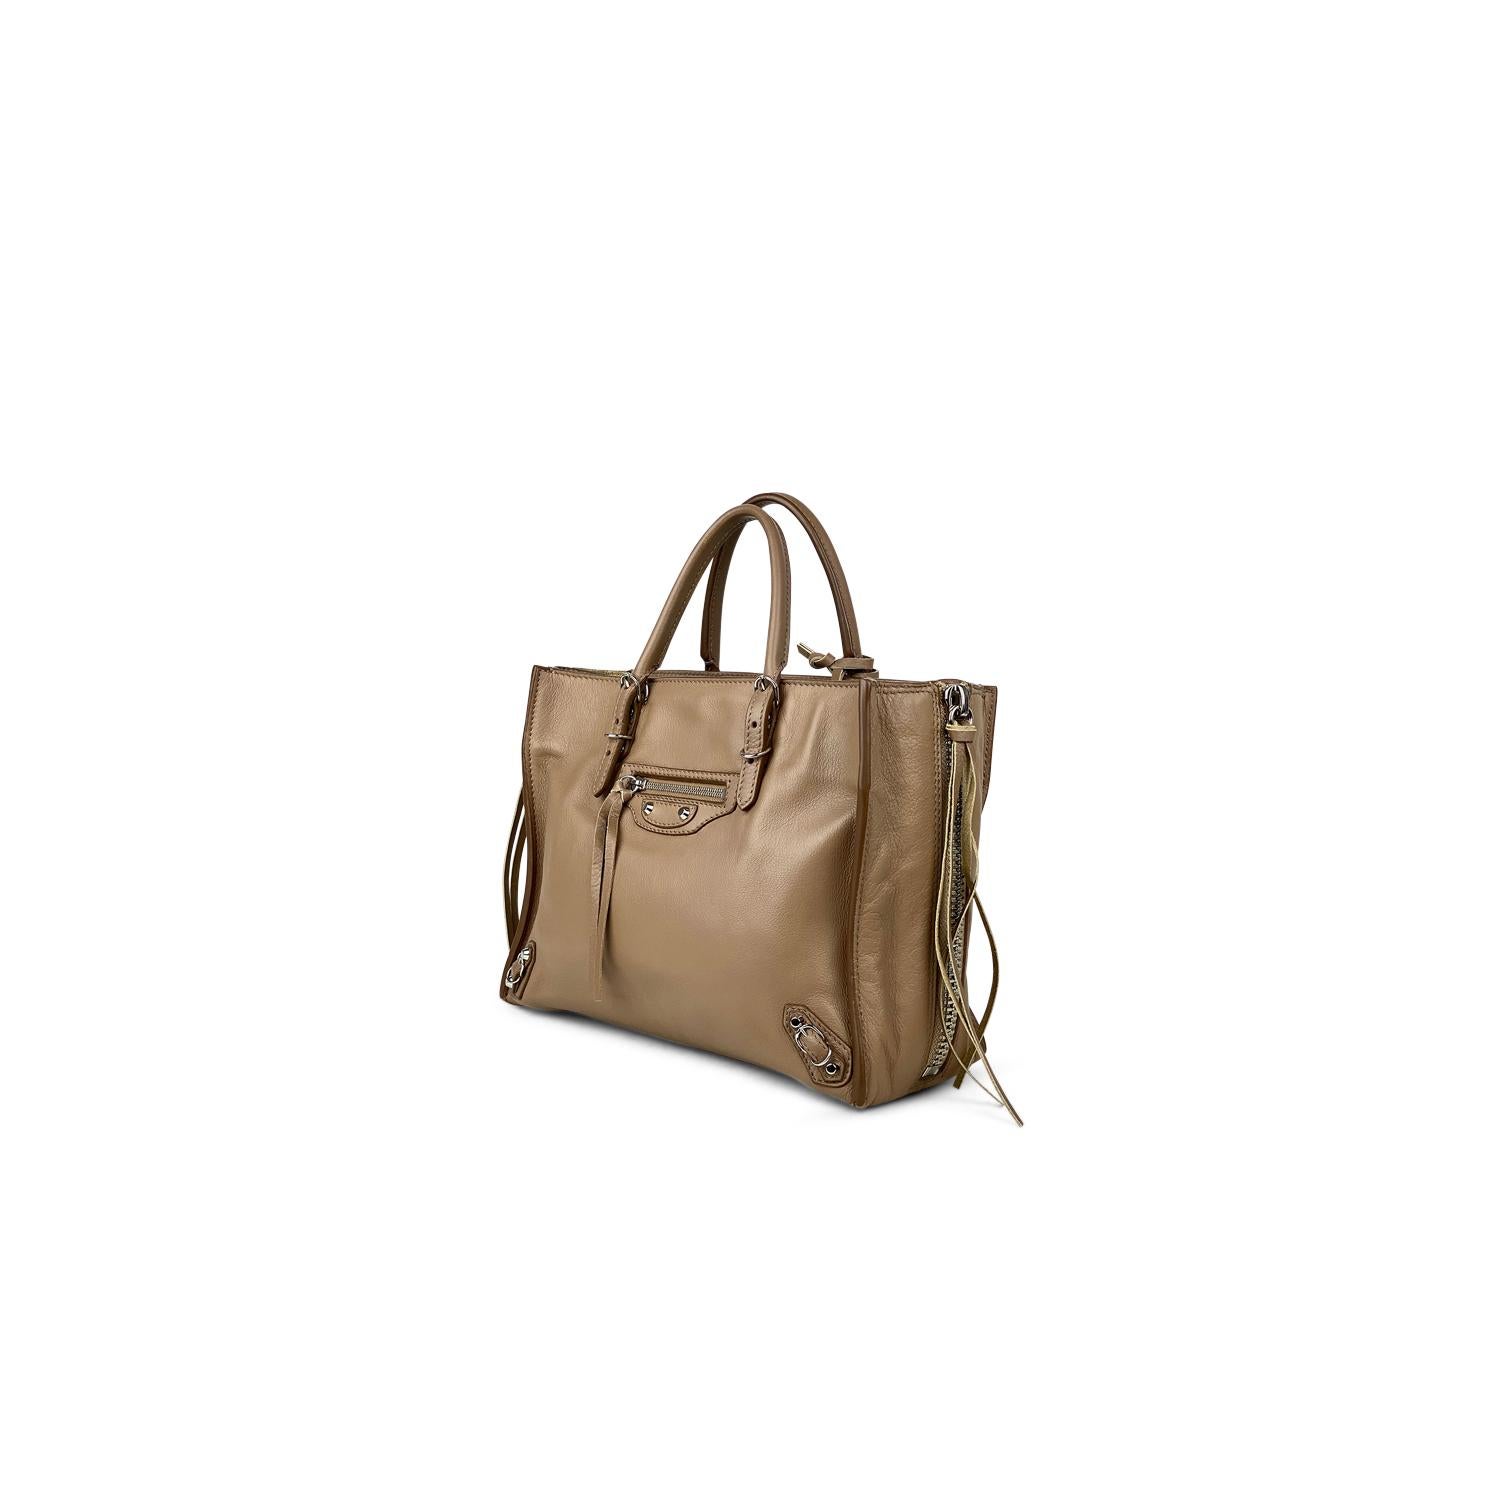 Taupe calfskin leather Balenciaga Mini Papier A6 Zip Around bag with

- Silver-tone hardware
- Dual rolled top handles
- Detachable flat shoulder strap
- Stud embellishments and buckle accents at front face
- Single front exterior zip pocket, zip